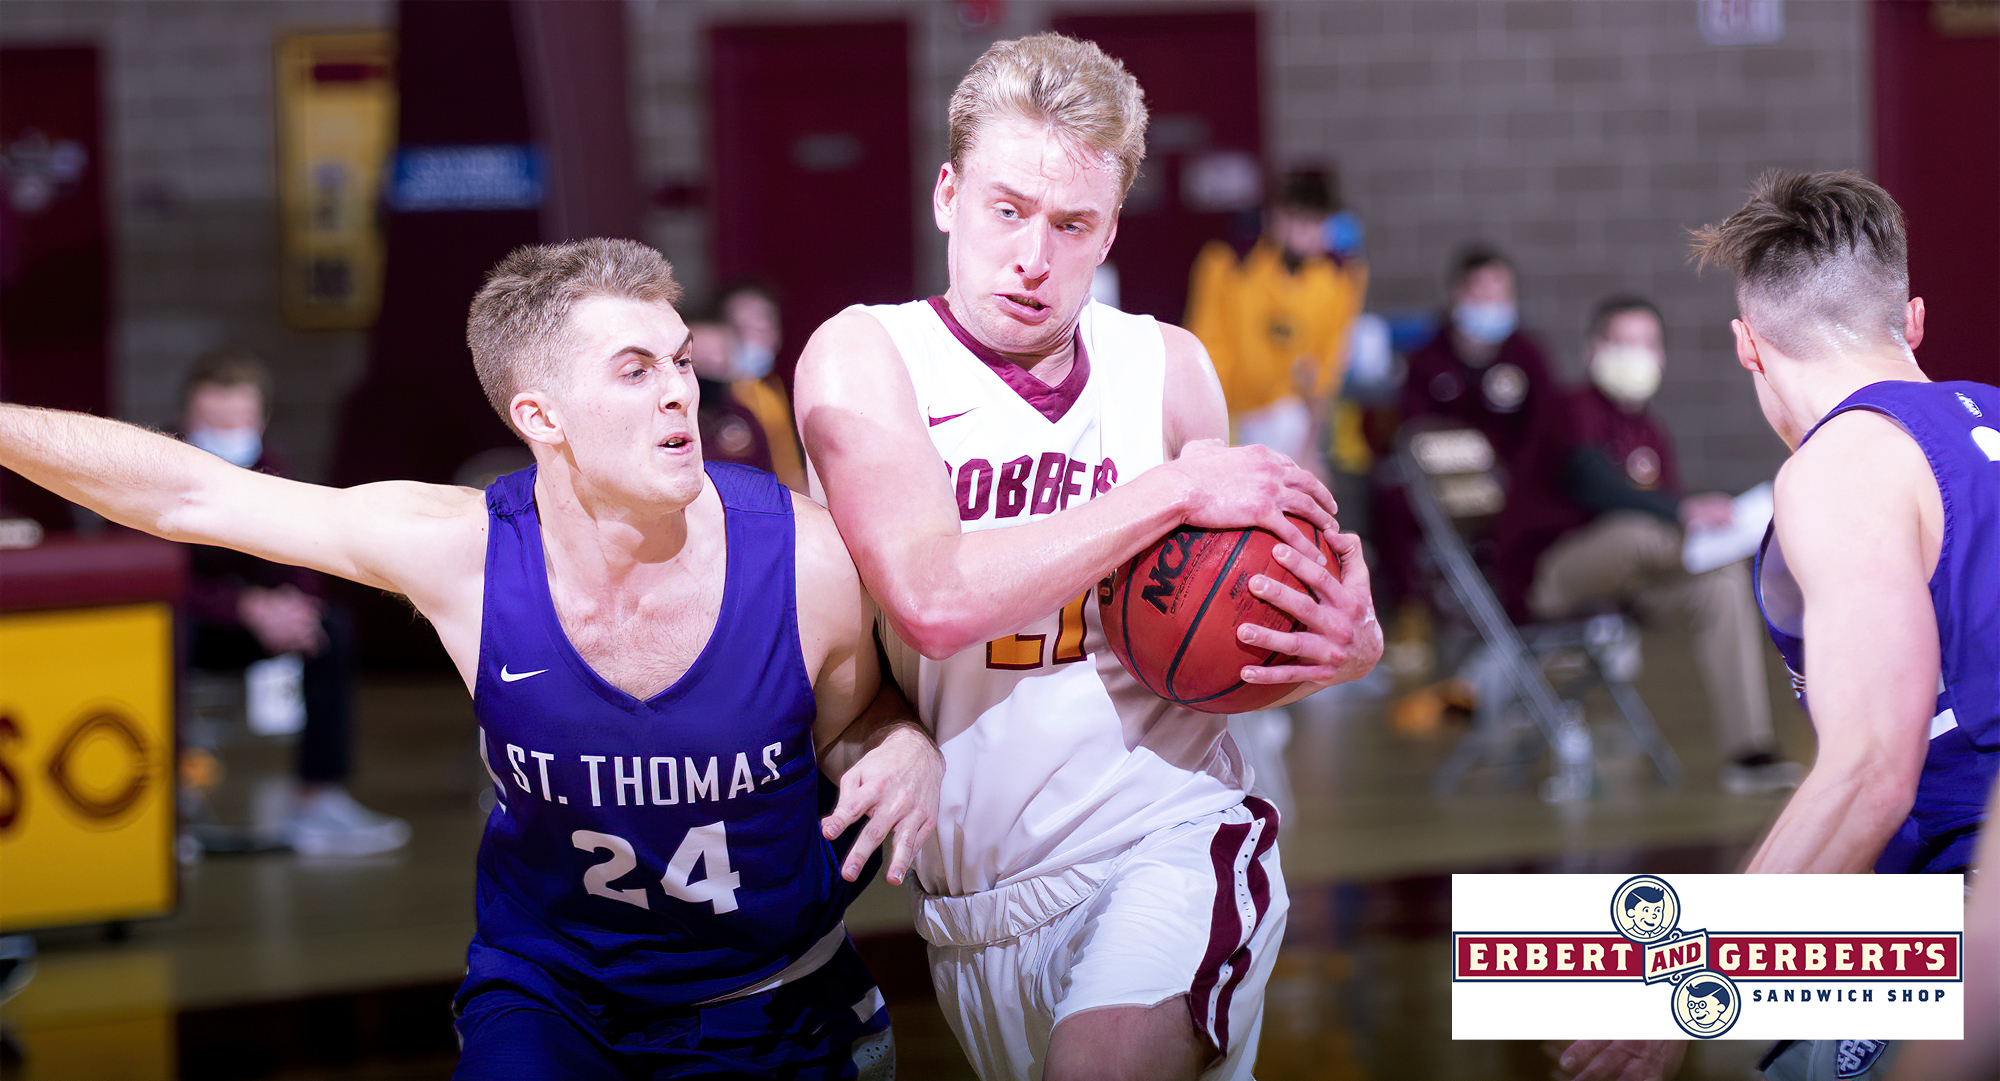 Junior David Birkeland gets tied up on a drive to the basket in the first half of the Cobbers' season opener against St. Thomas. Birkeland led CC with a career-high 19 points.